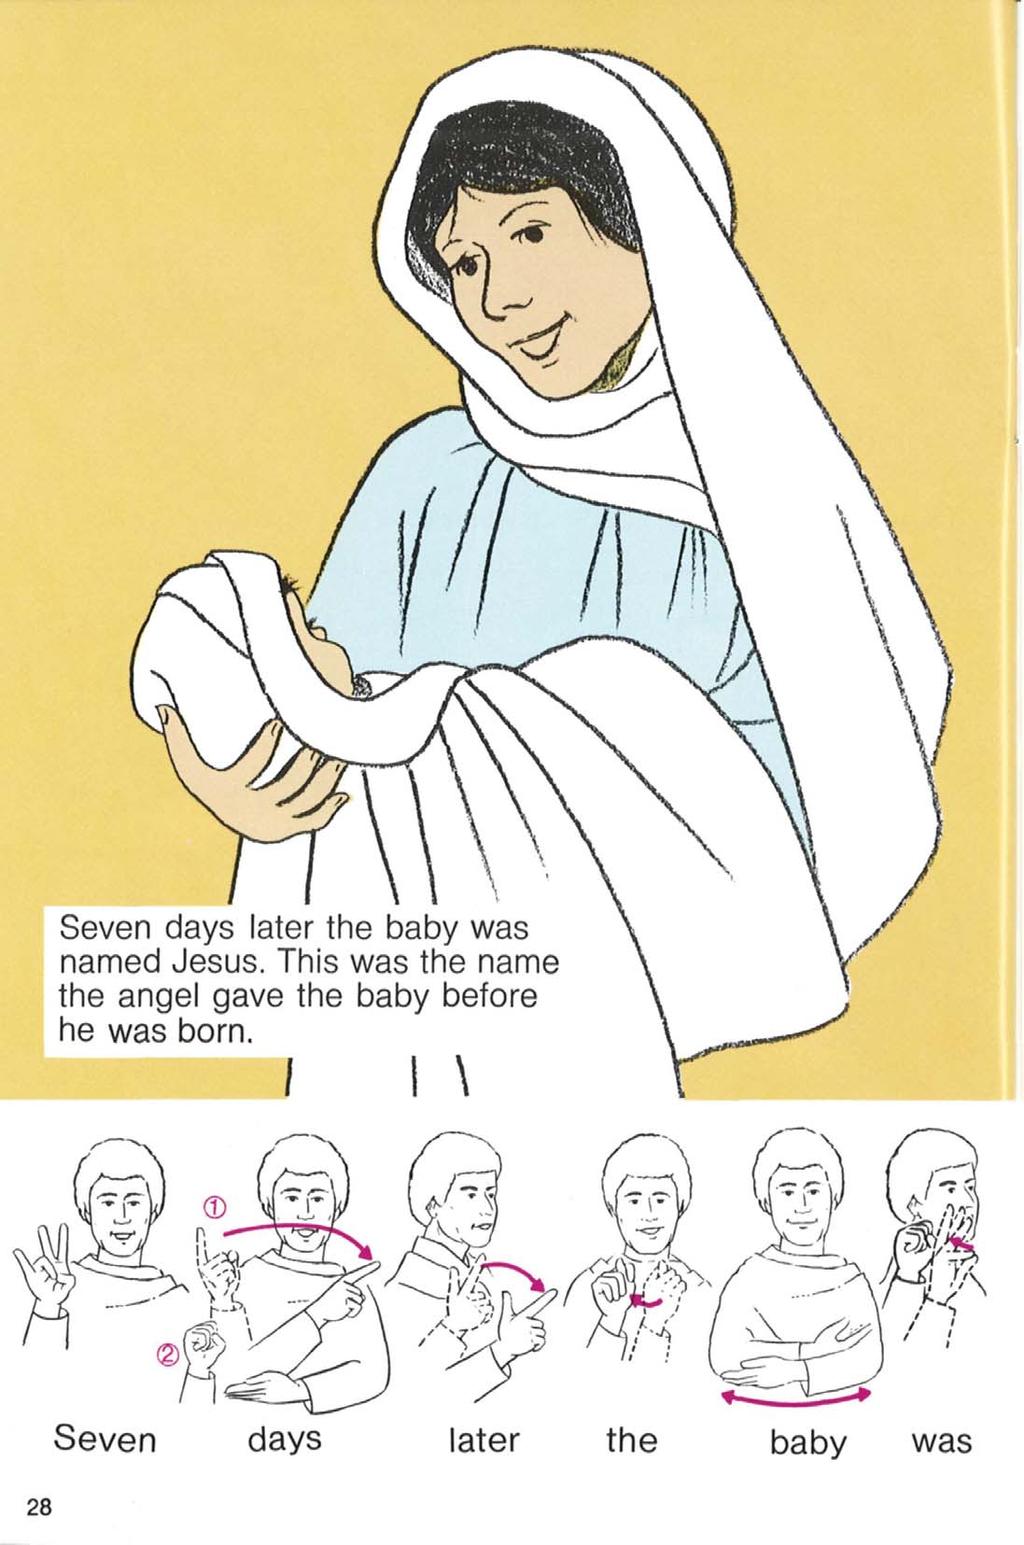 Seven days later the baby was named Jesus.